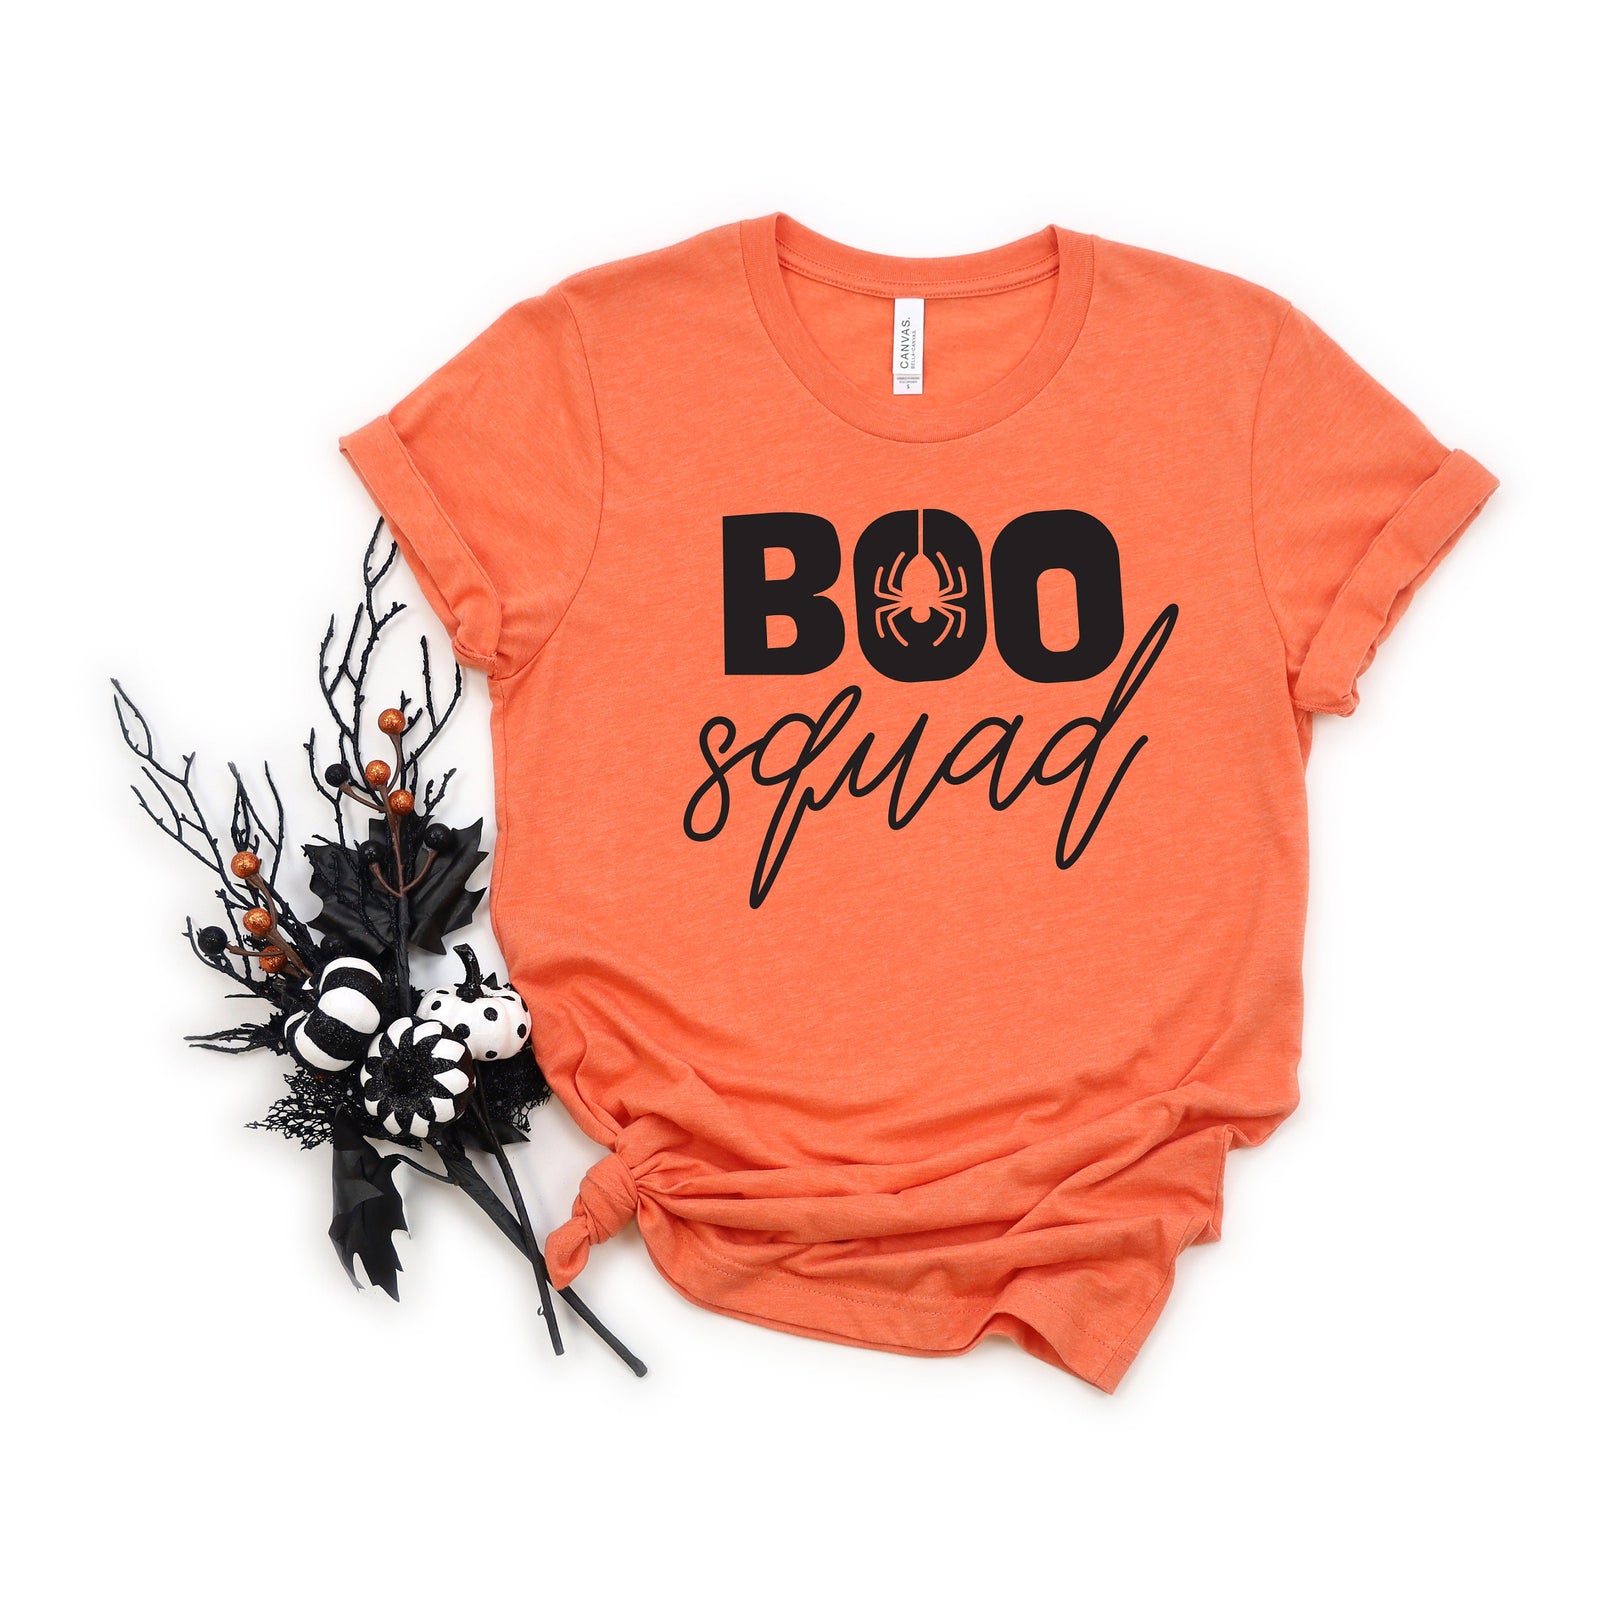 Boo Squad Adult T Shirt - Halloween - Office - School - Teacher - Grade Level - Fun Not So Scary Ghosts